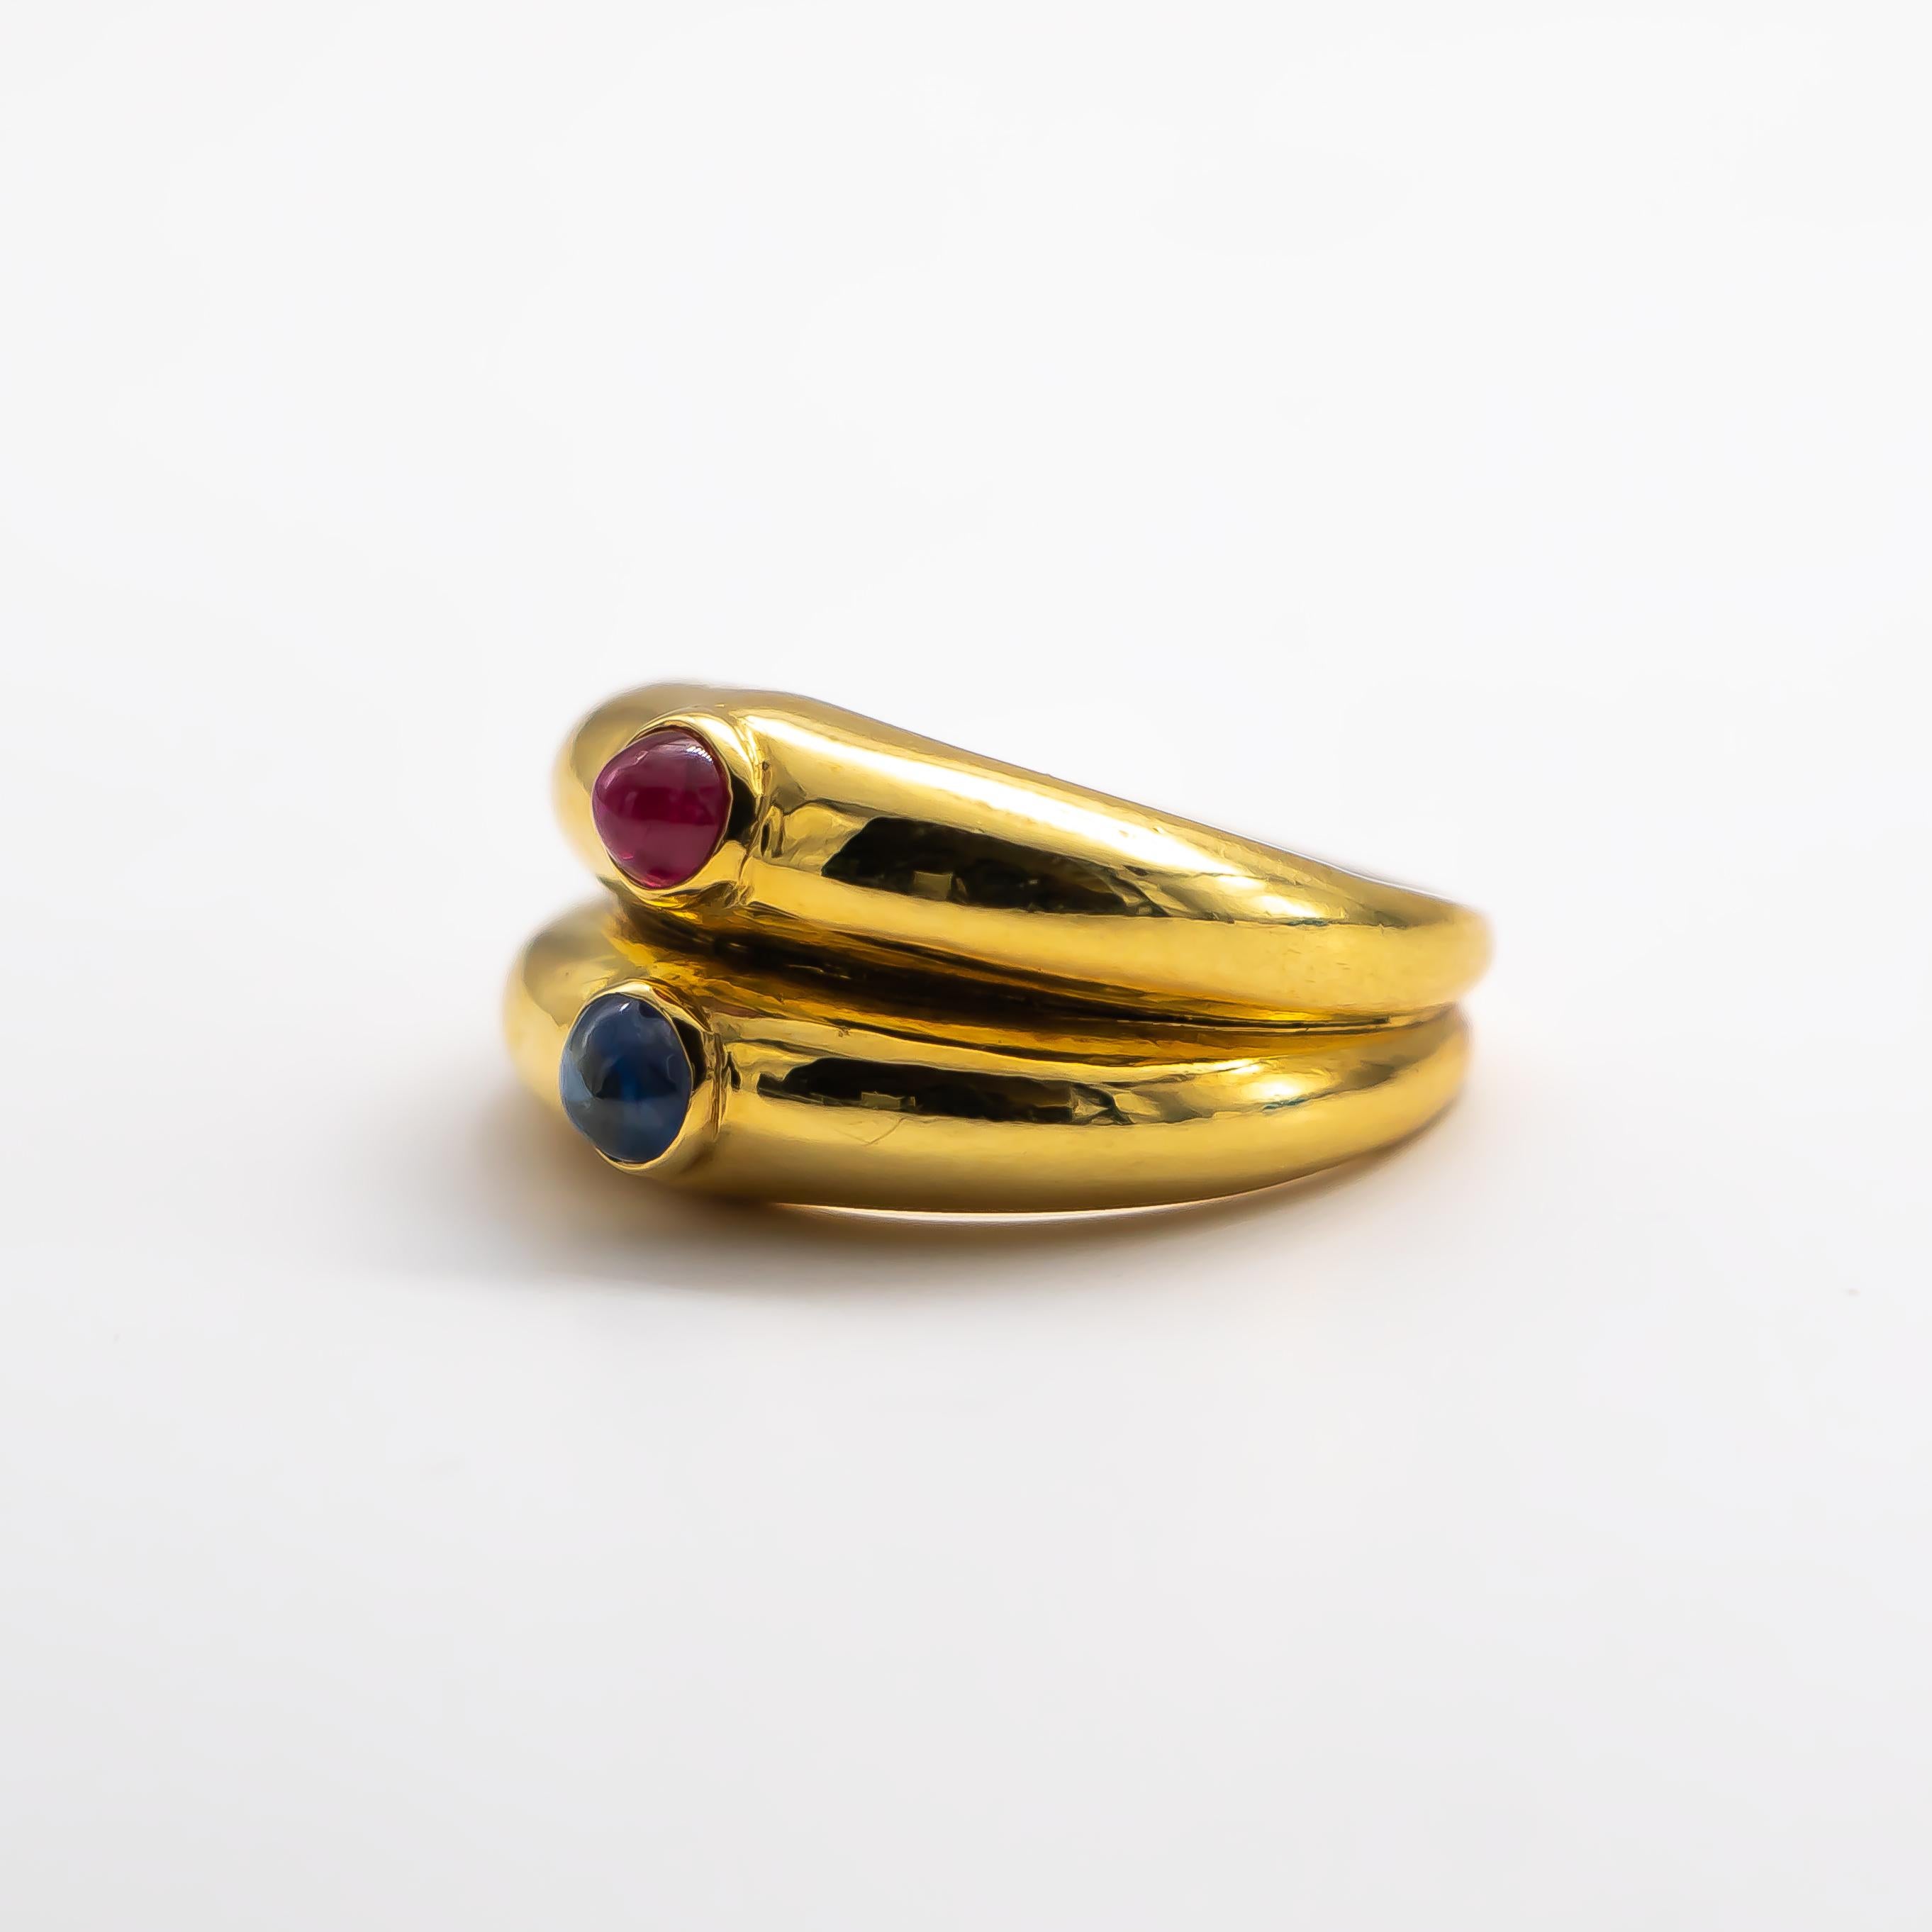 Cabochon 0.2 Carat Ruby and Cabochon 0.2 Carat Sapphire Ring 18K Yellow Gold 5